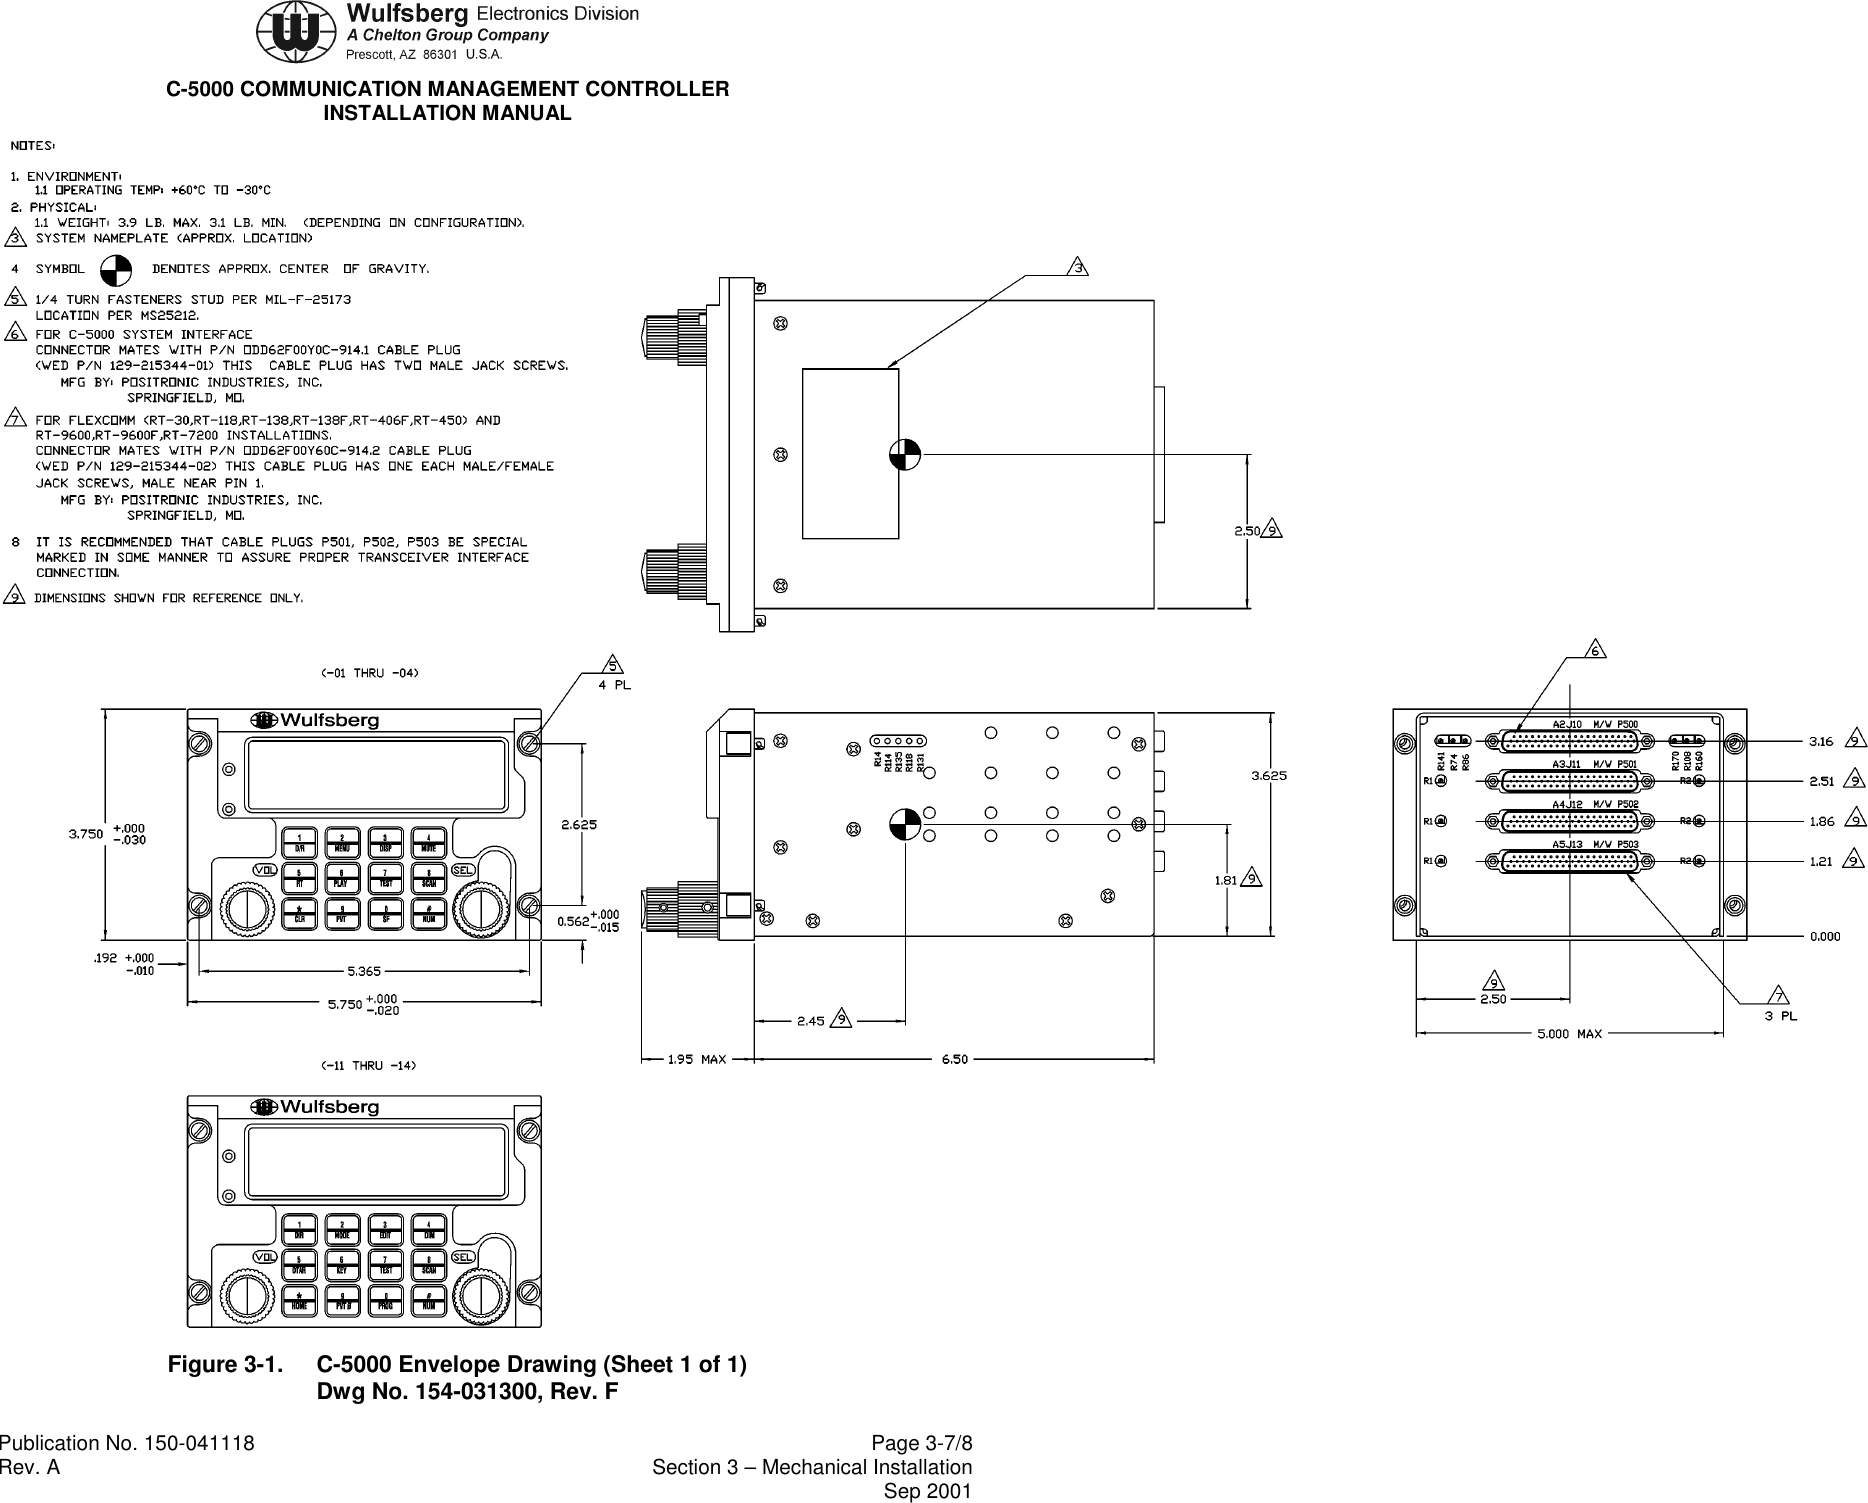 C-5000 COMMUNICATION MANAGEMENT CONTROLLERINSTALLATION MANUALPublication No. 150-041118 Page 3-7/8Rev. A Section 3 – Mechanical InstallationSep 2001Figure 3-1. C-5000 Envelope Drawing (Sheet 1 of 1)Dwg No. 154-031300, Rev. F